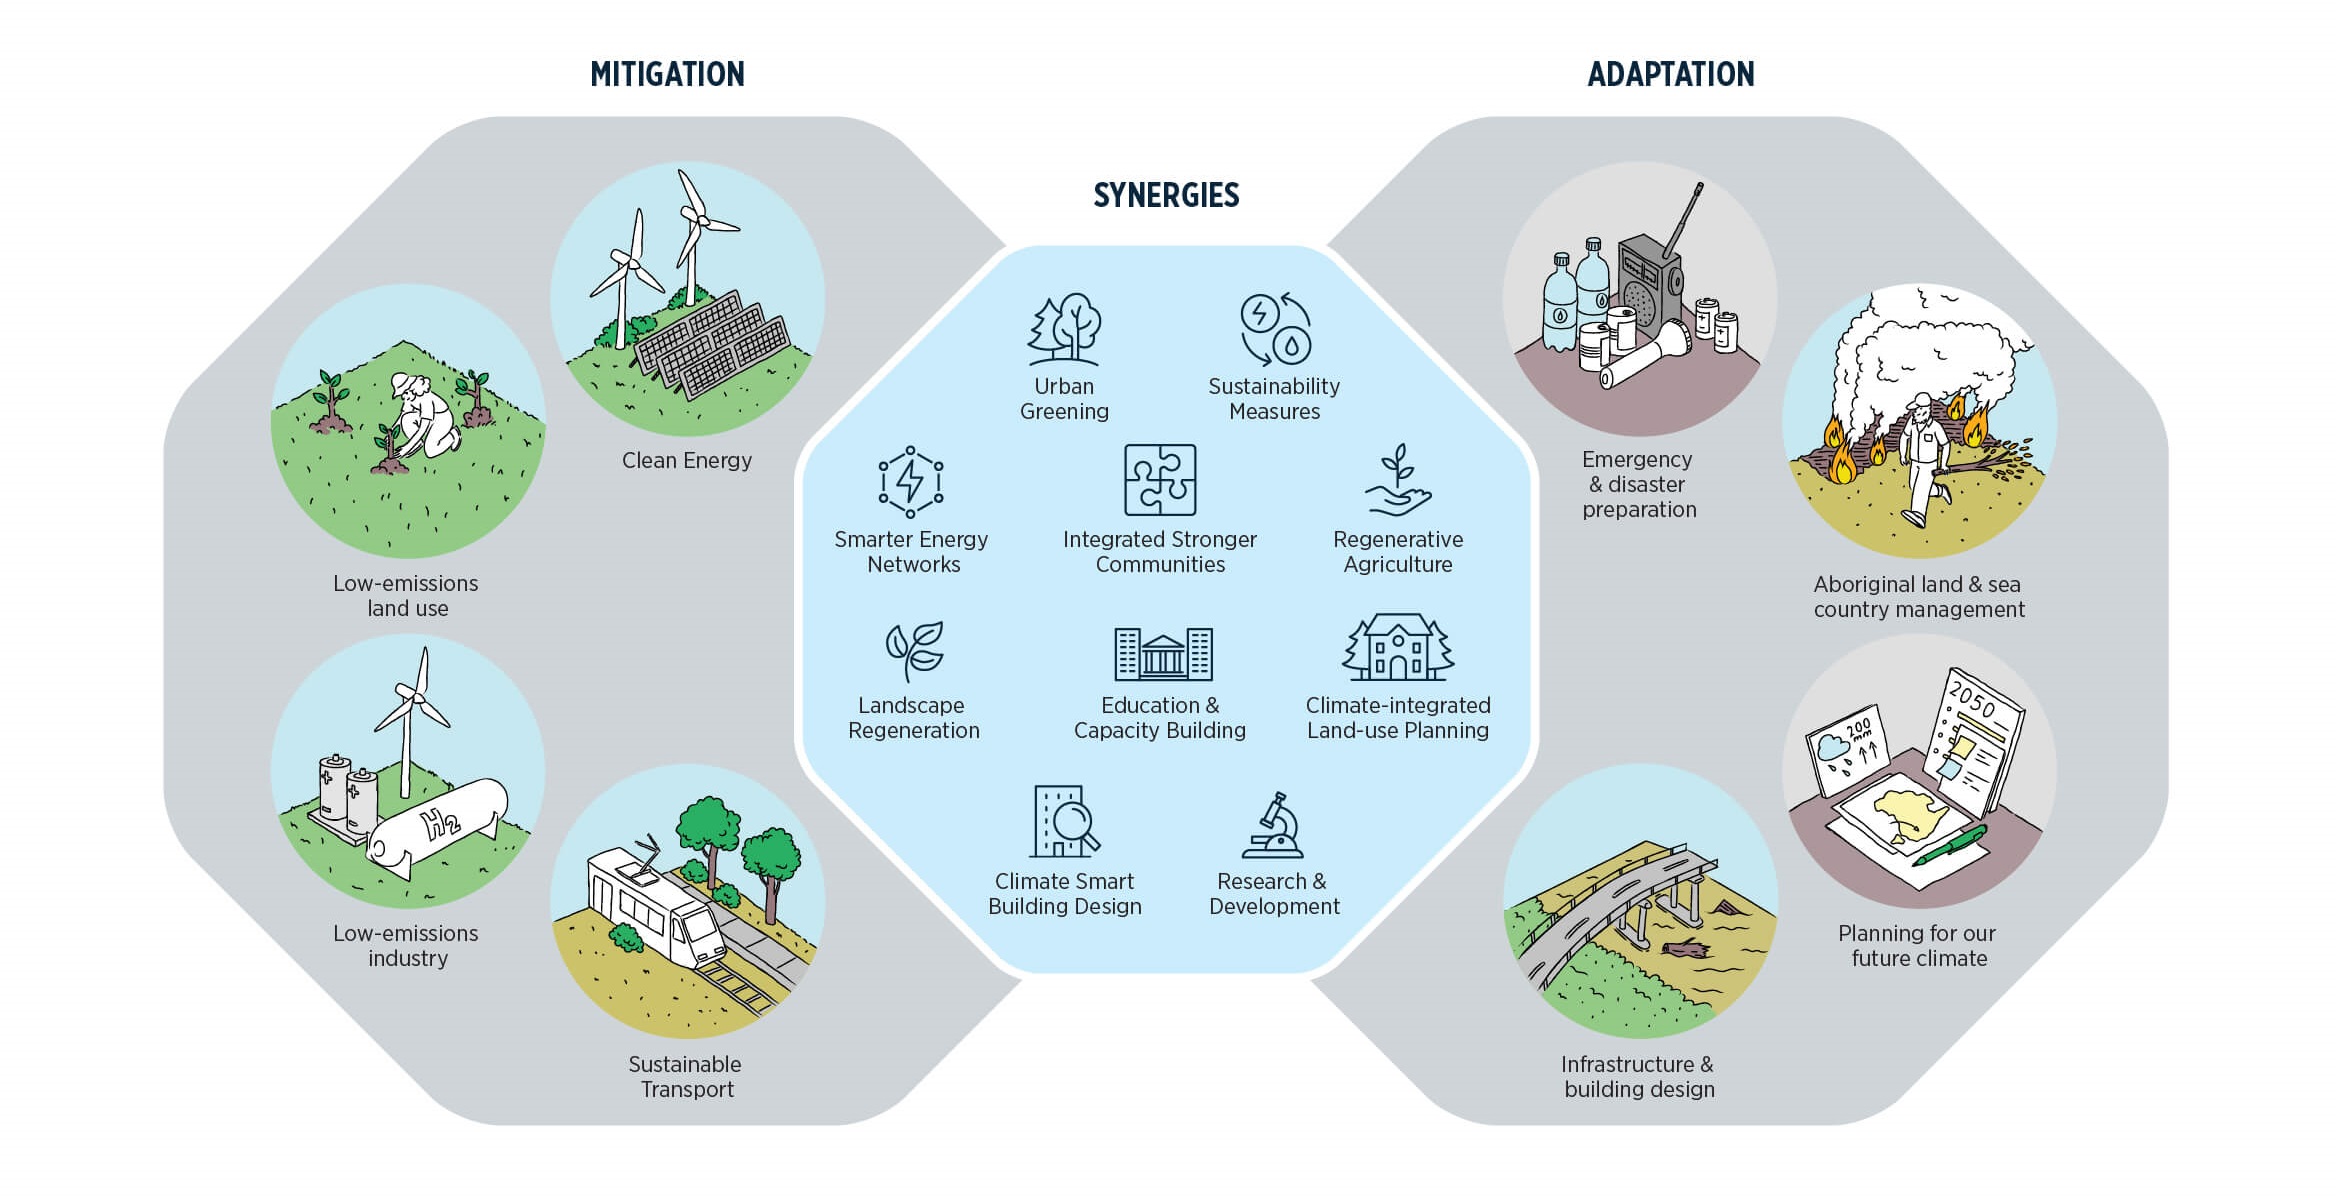 Infographic showing synergies between climate change mitigation and adaptation